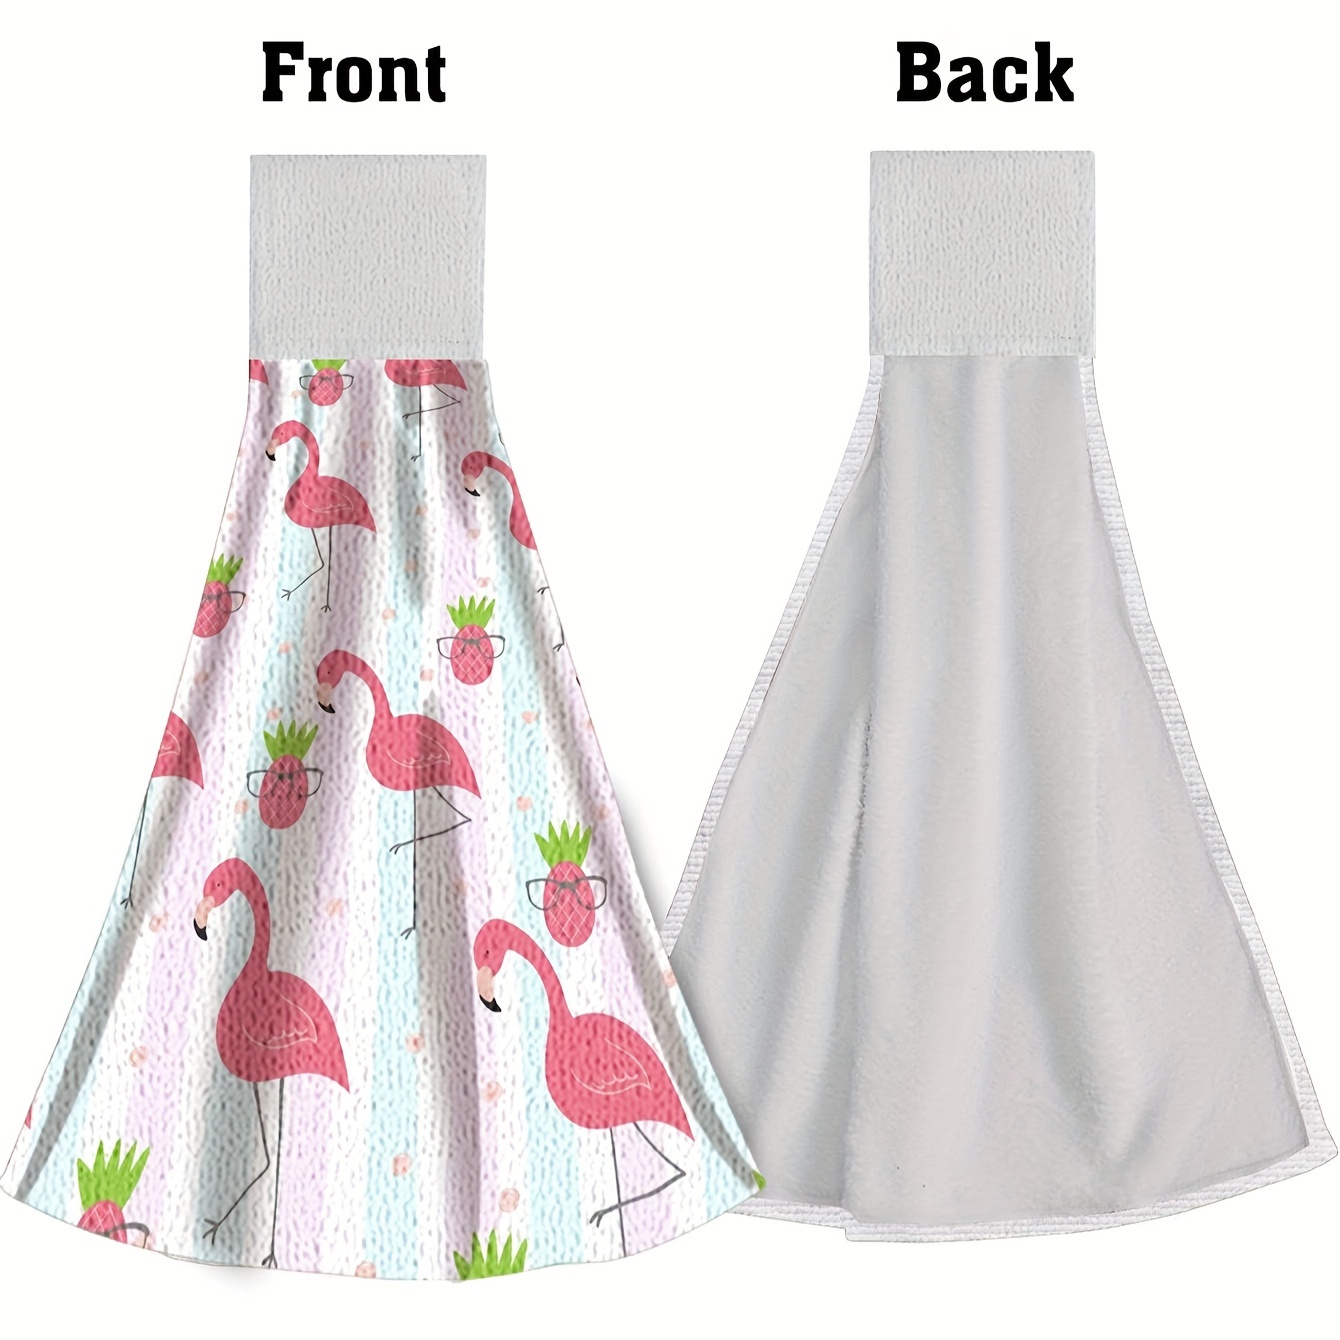 2pcs Kitchen Hand Towels,Kitchen Hanging Tie Towel For Wiping